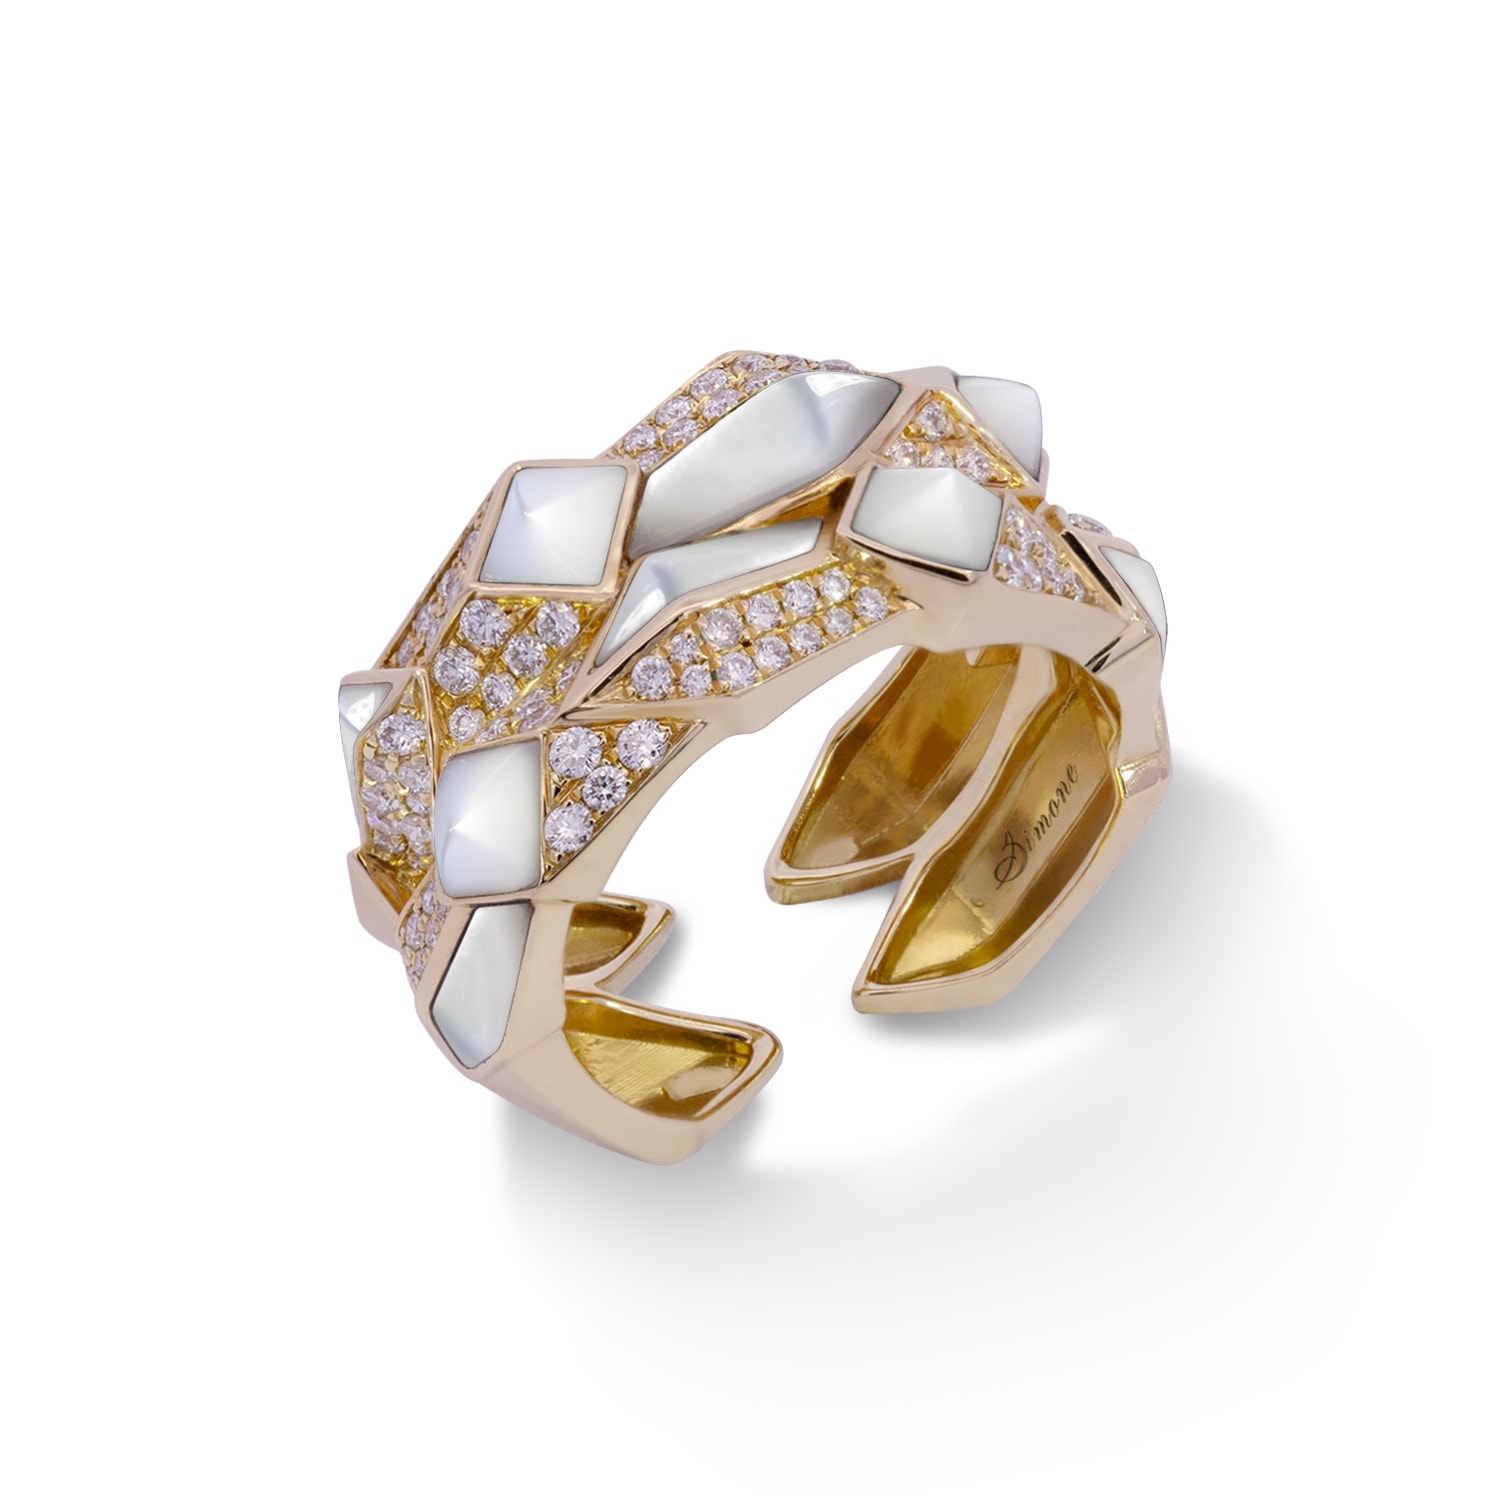 Women’s White / Rose Gold Edgy Double Unisex Ring In Solid Rose Gold, Diamonds, And White Mother-Of-Pearl Simone Jewels